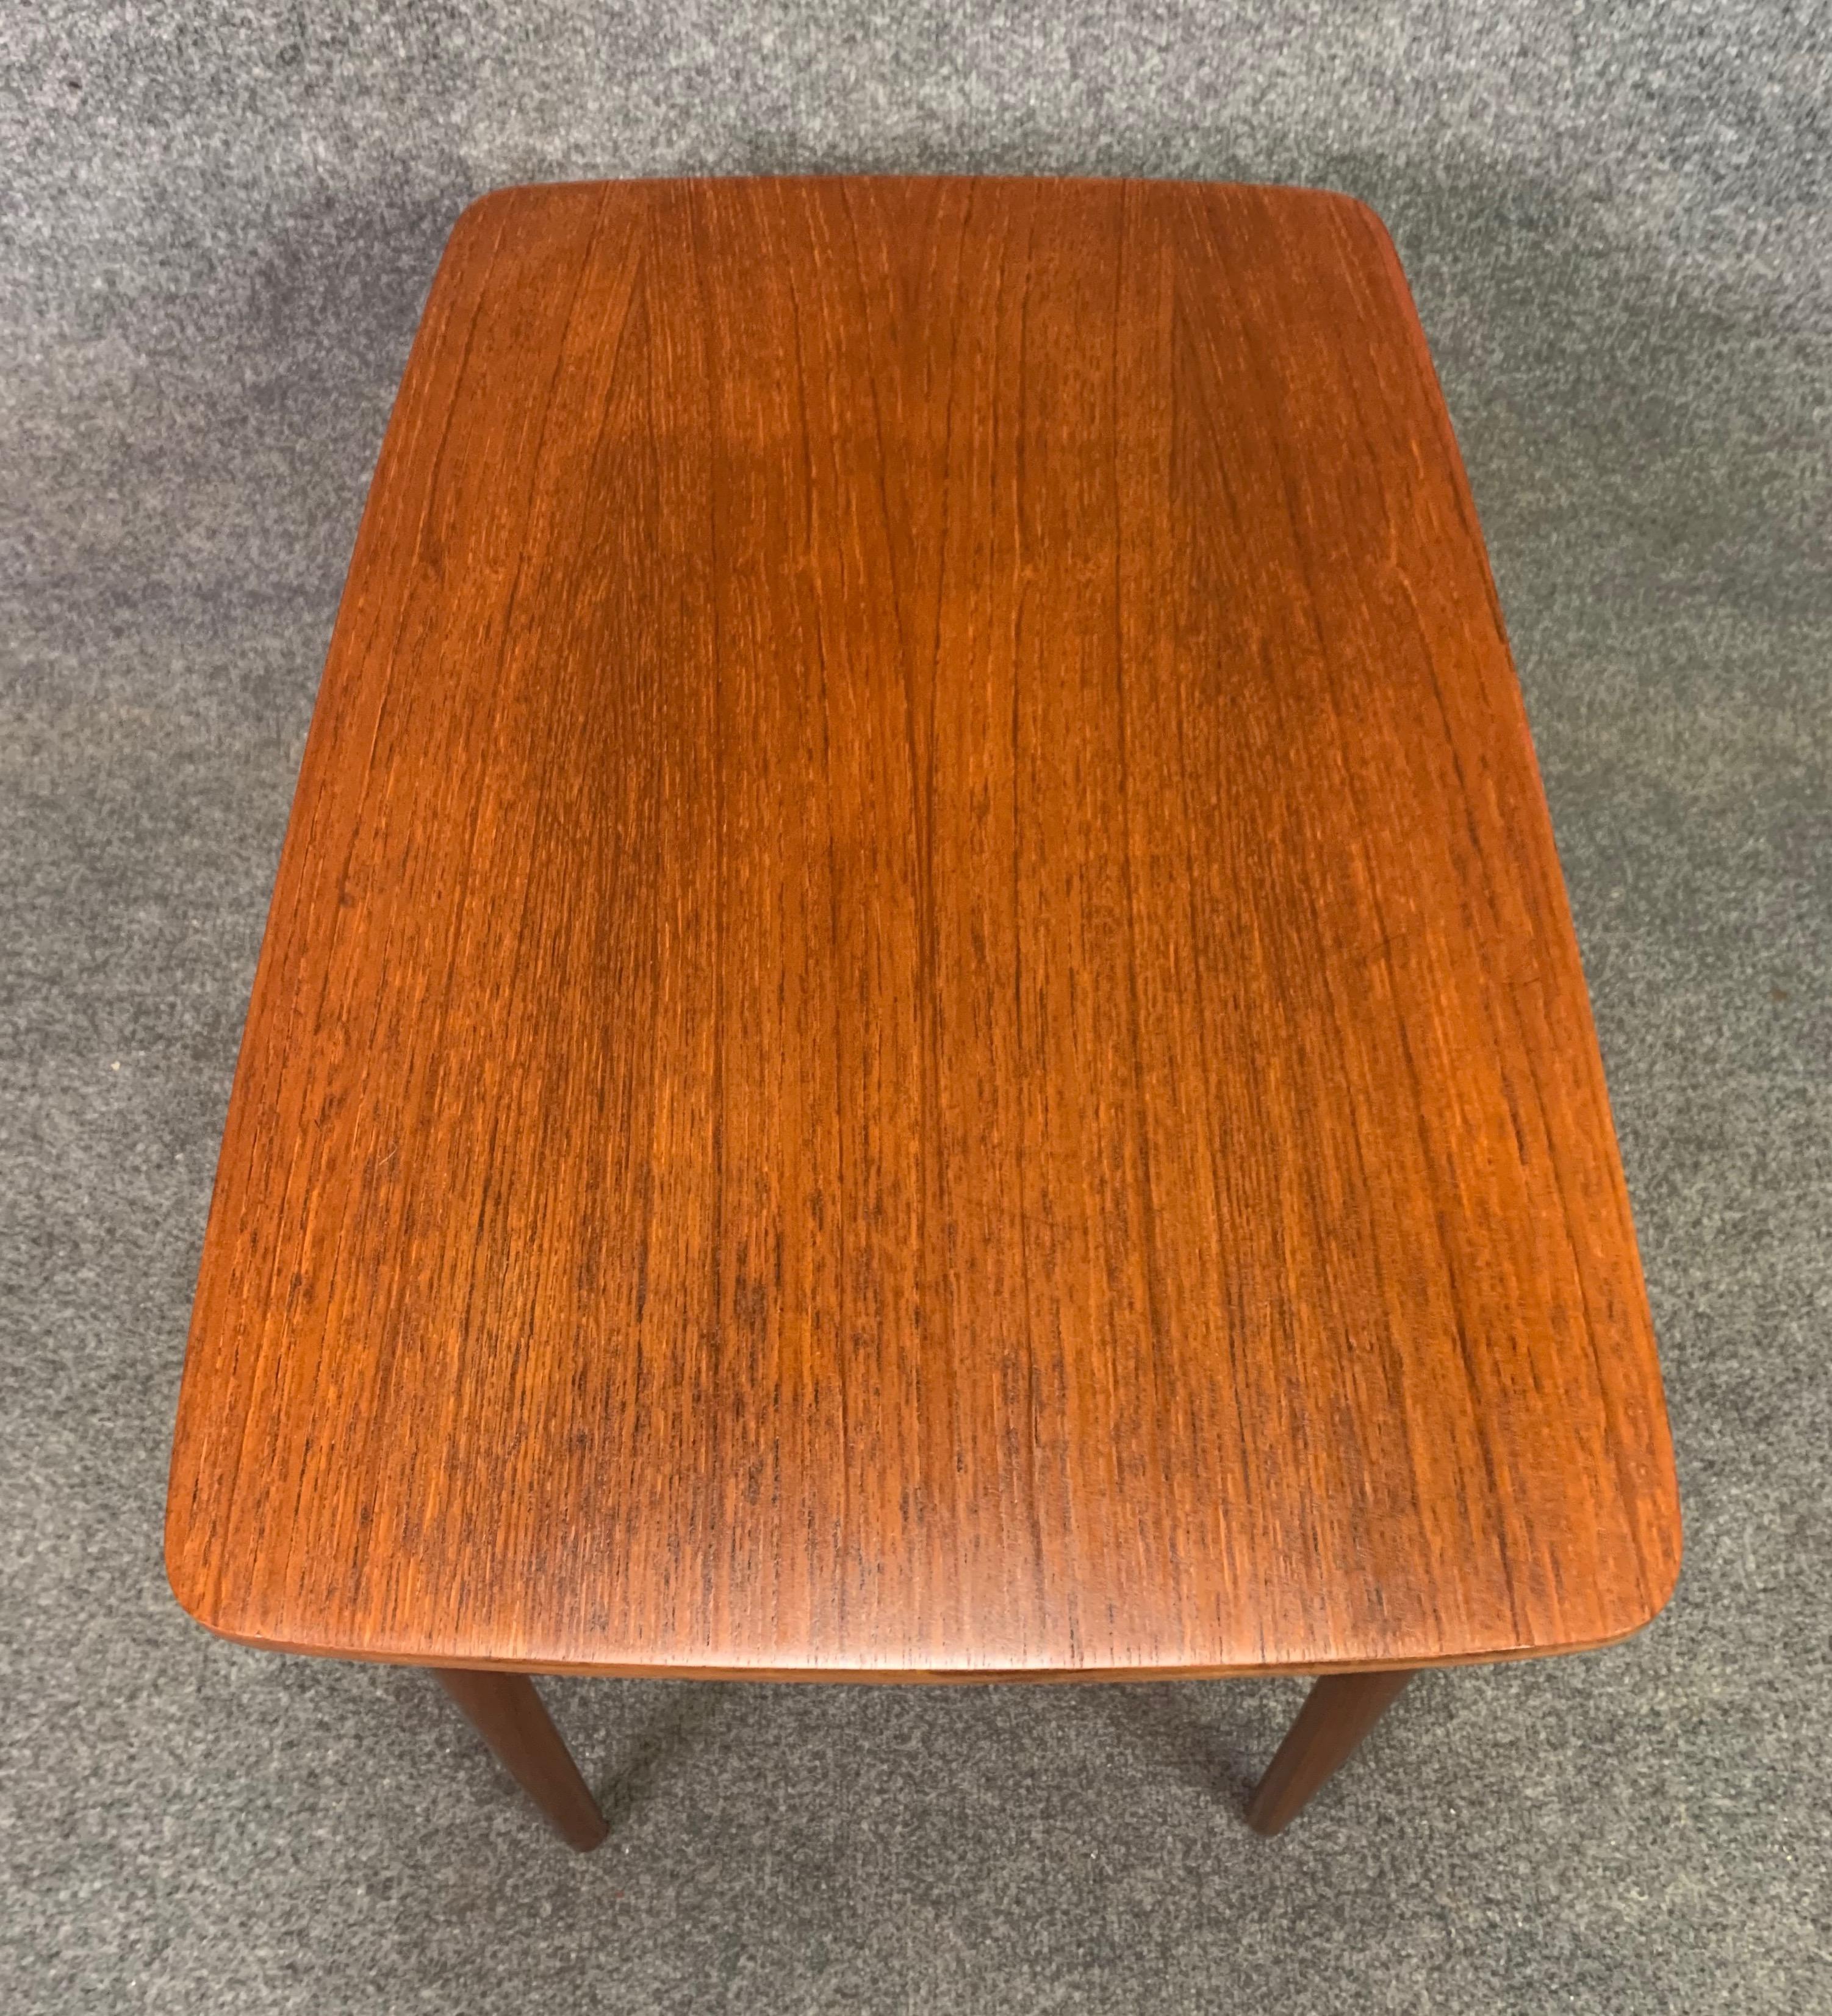 Here is a lovely 1960s Scandinavian Modern end table in teak recently imported from Denmark to California before its refinishing.
This side table features a vibrant teak wood grain, one cane shelf and four tapered legs.
Excellent